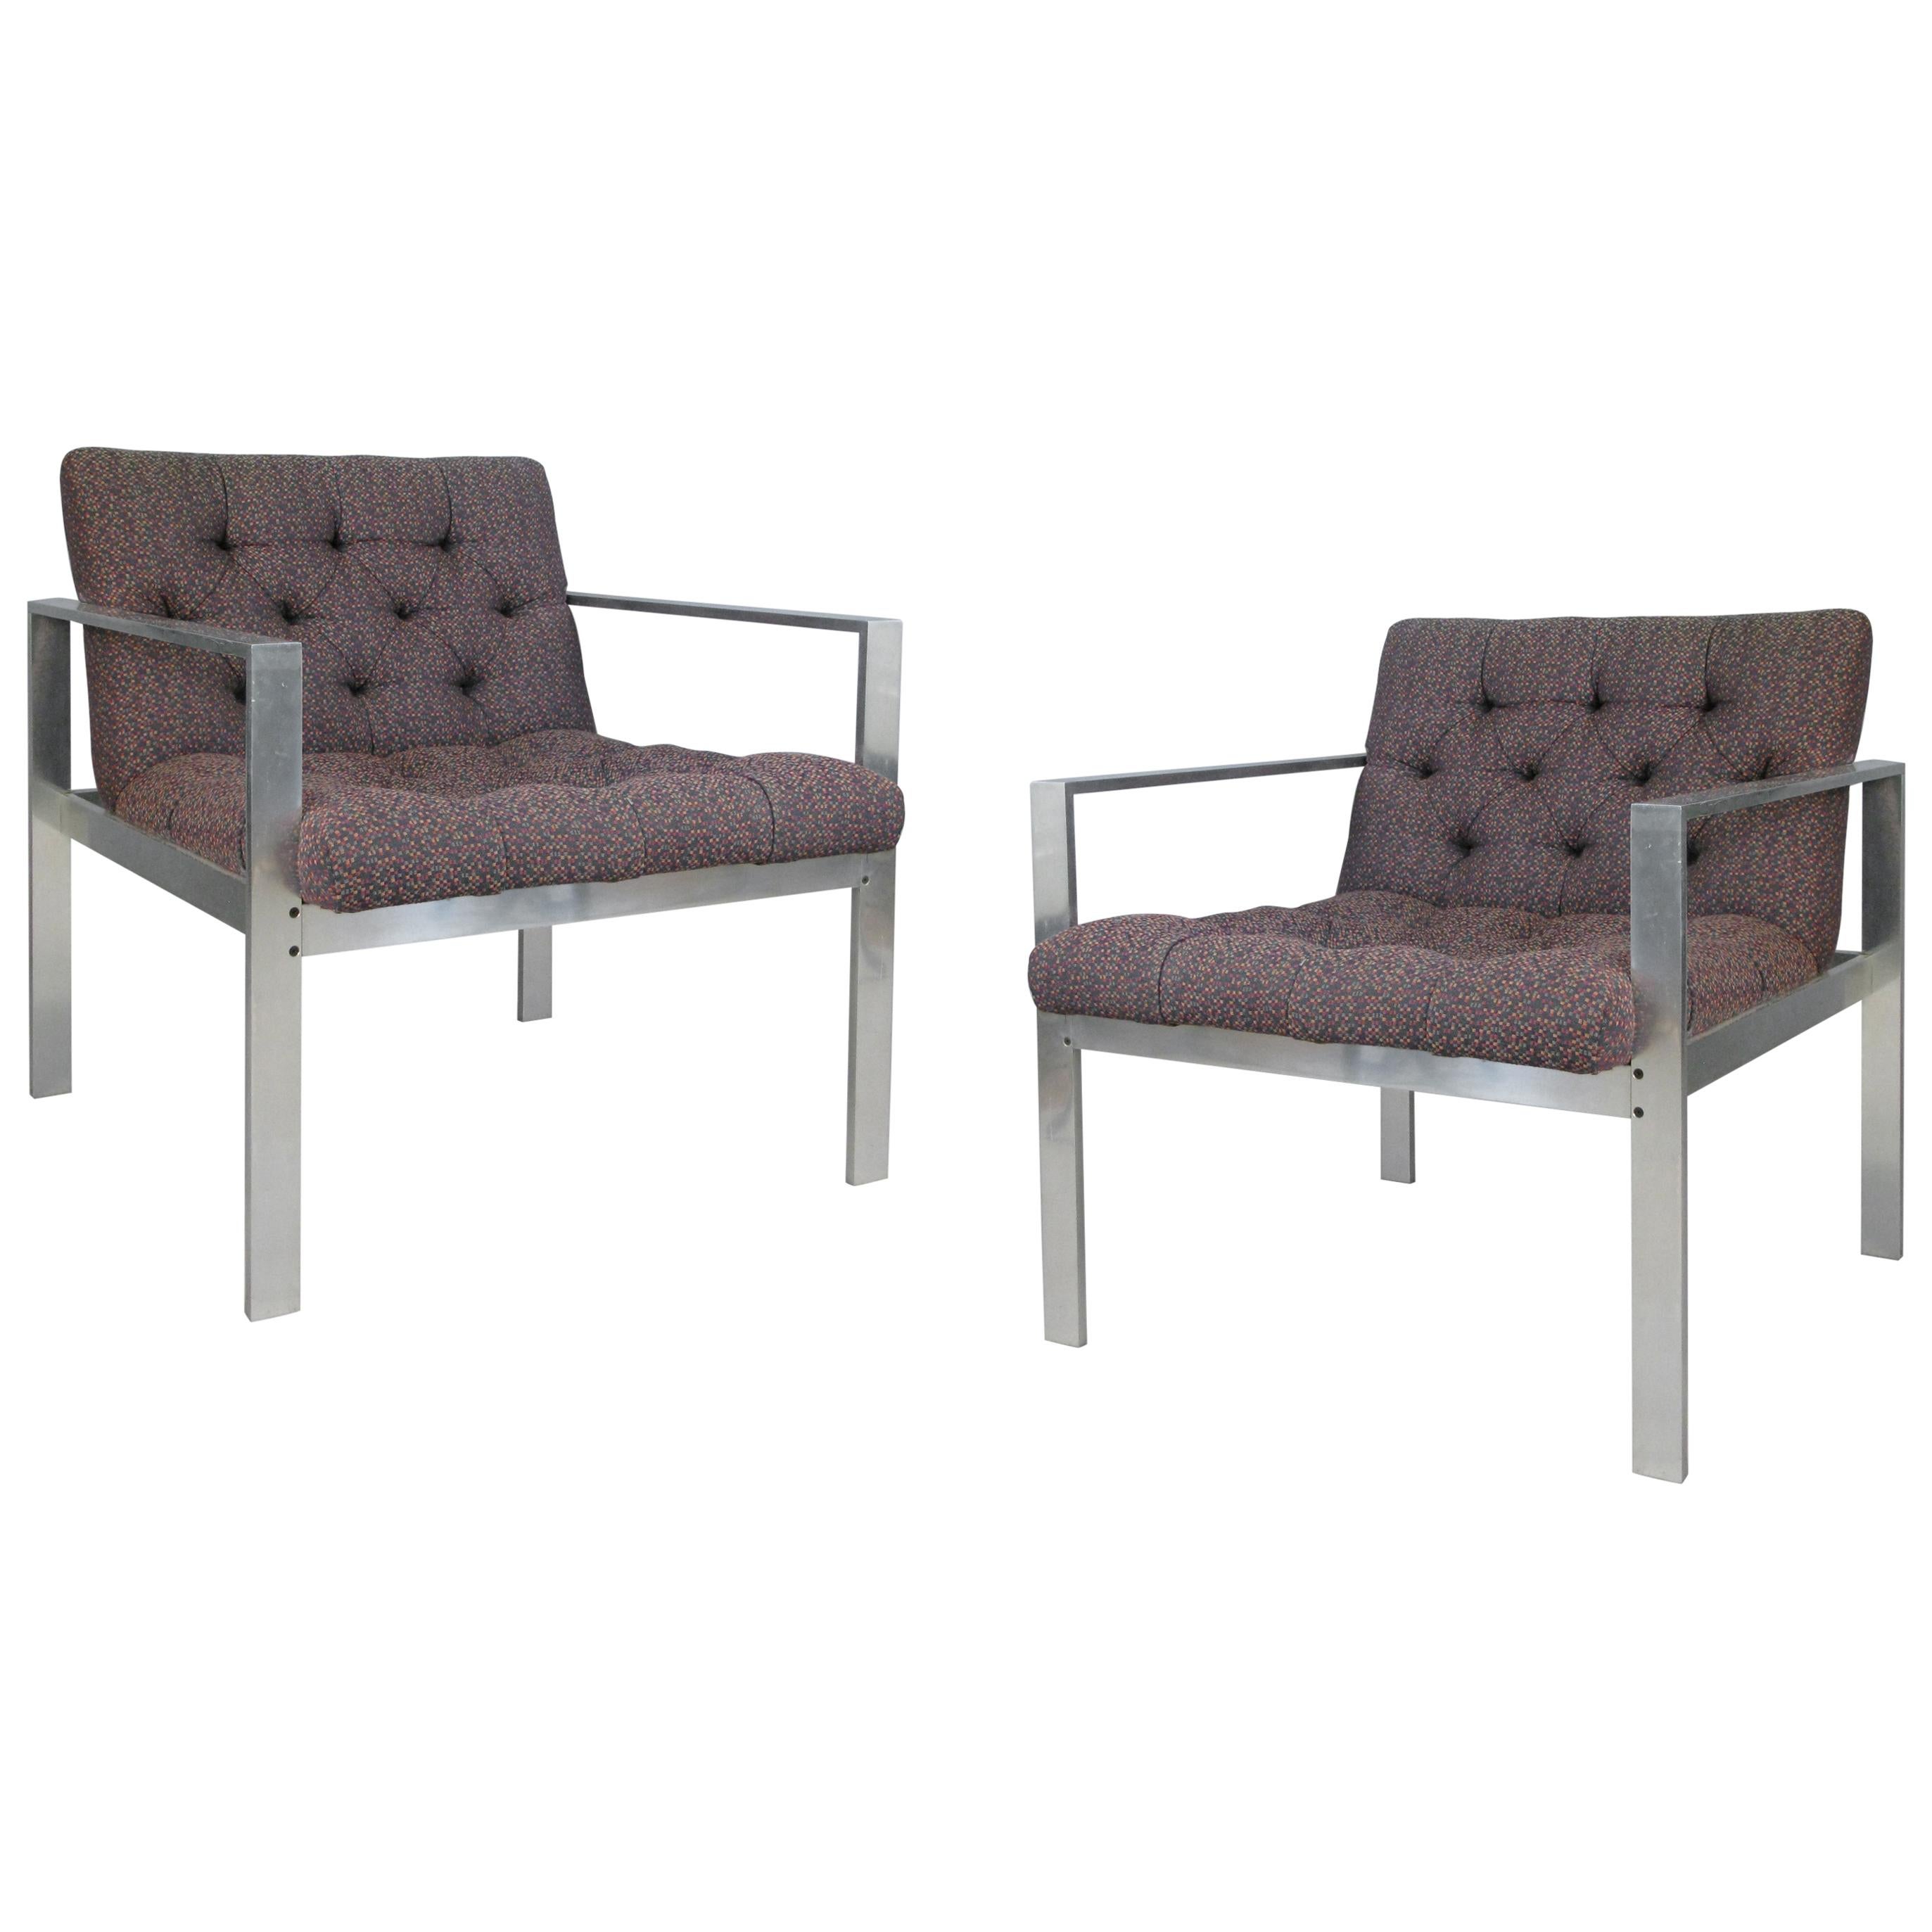 Pair of Aluminum Frame Lounge Chairs by Harvey Probber, circa 1960